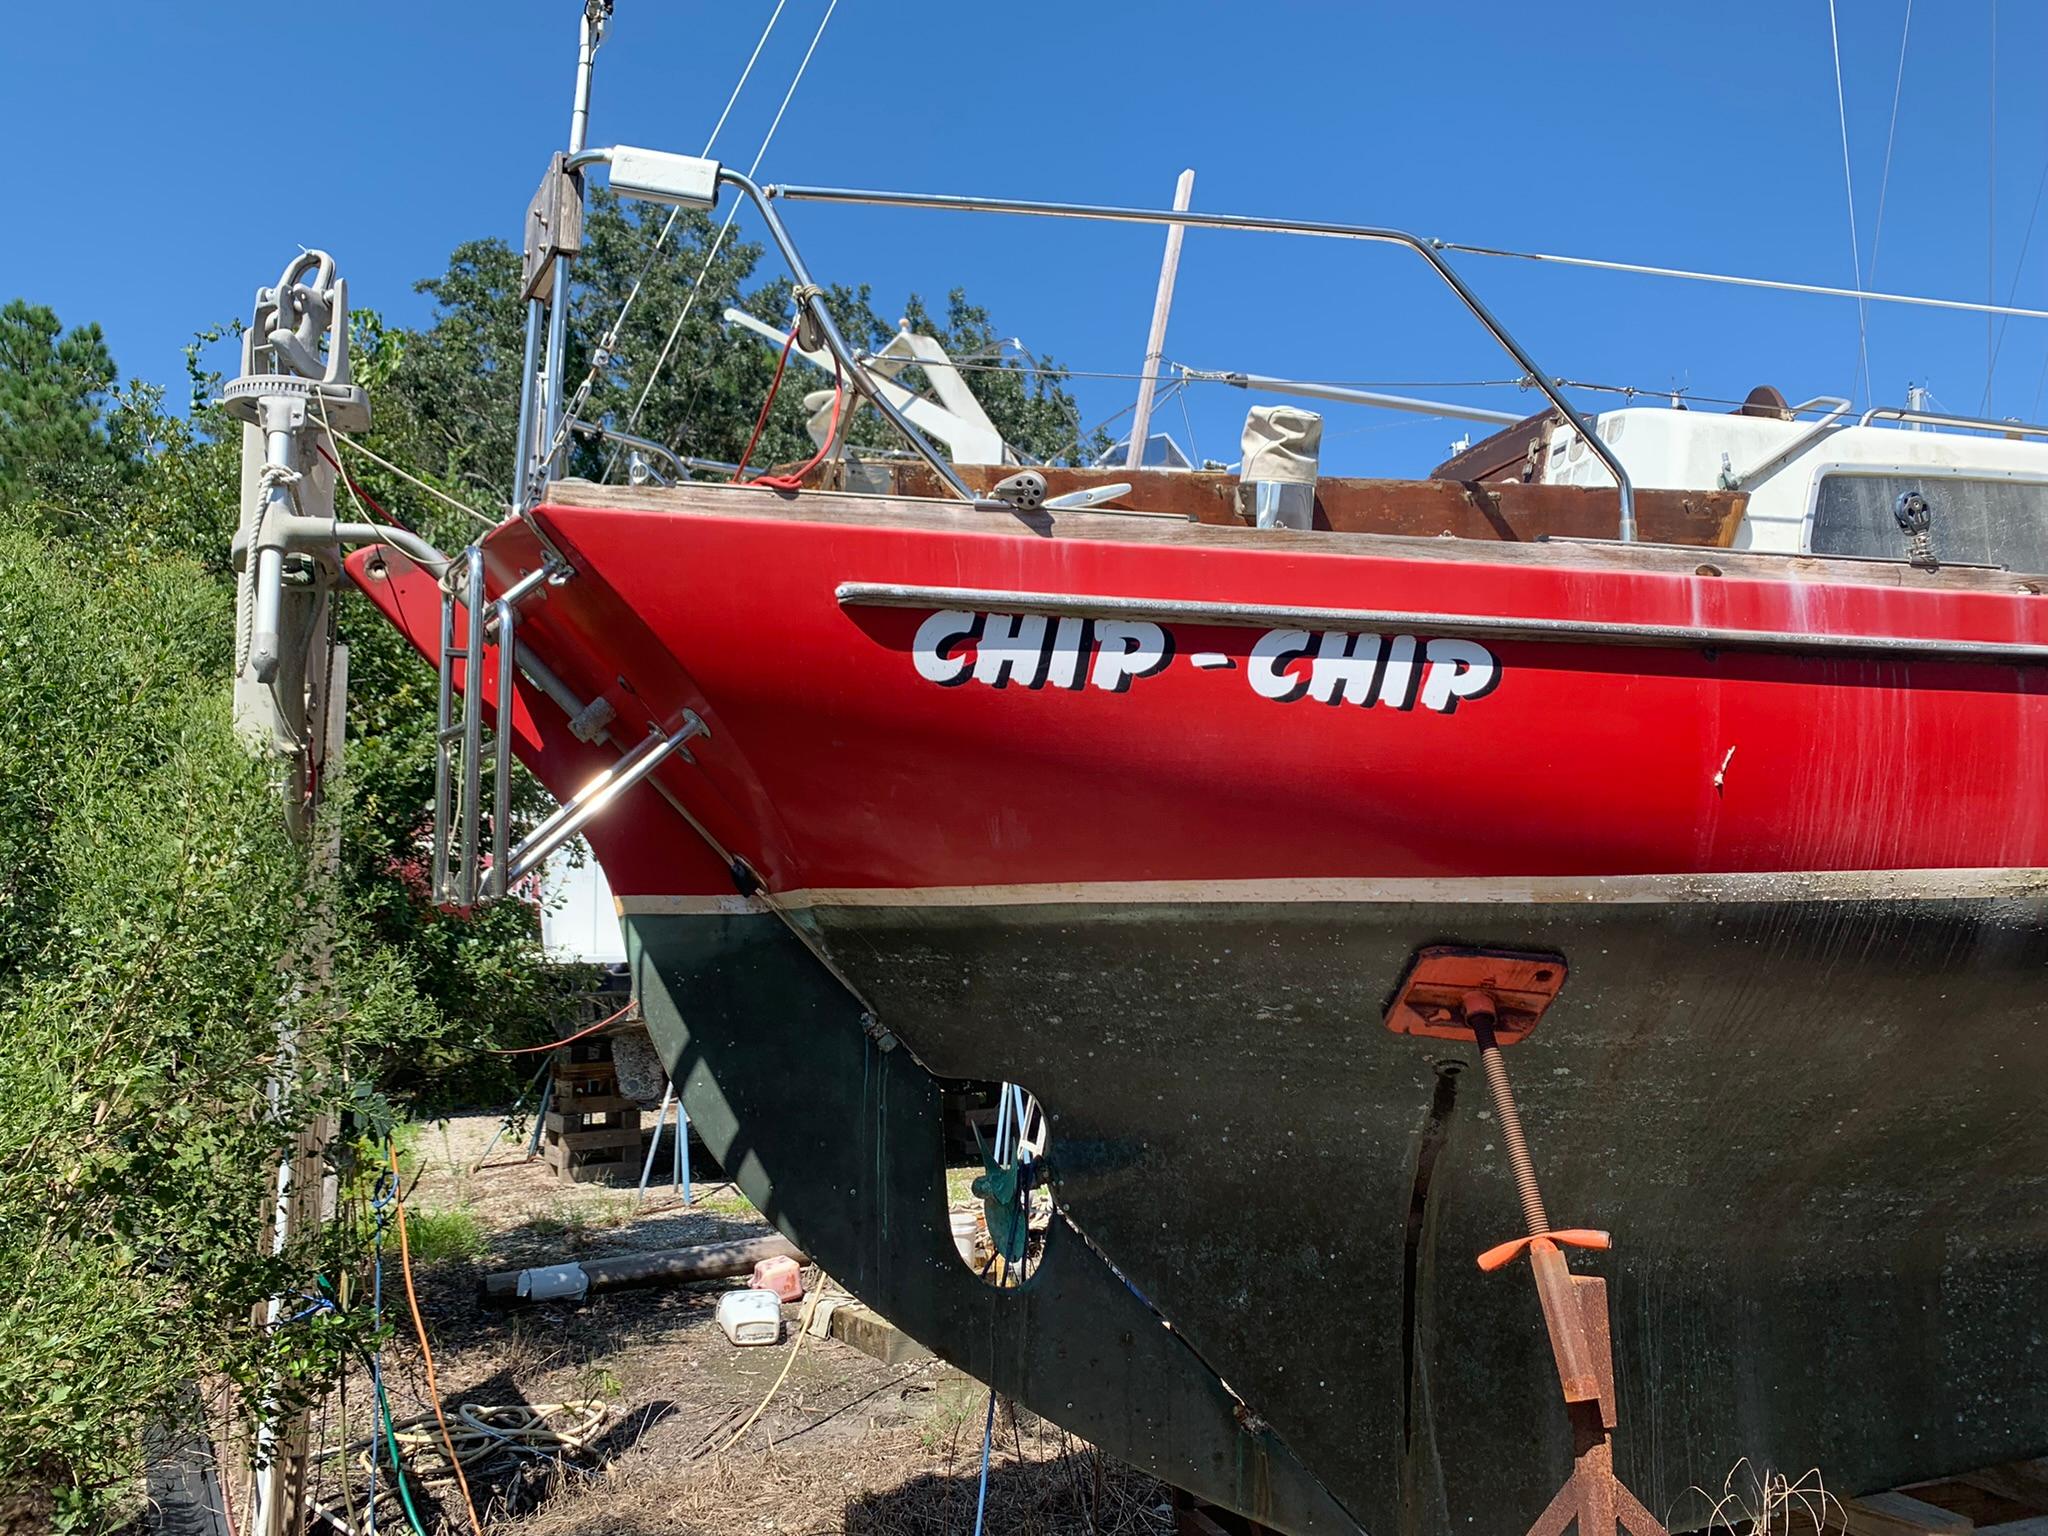 great dane 28 sailboat for sale